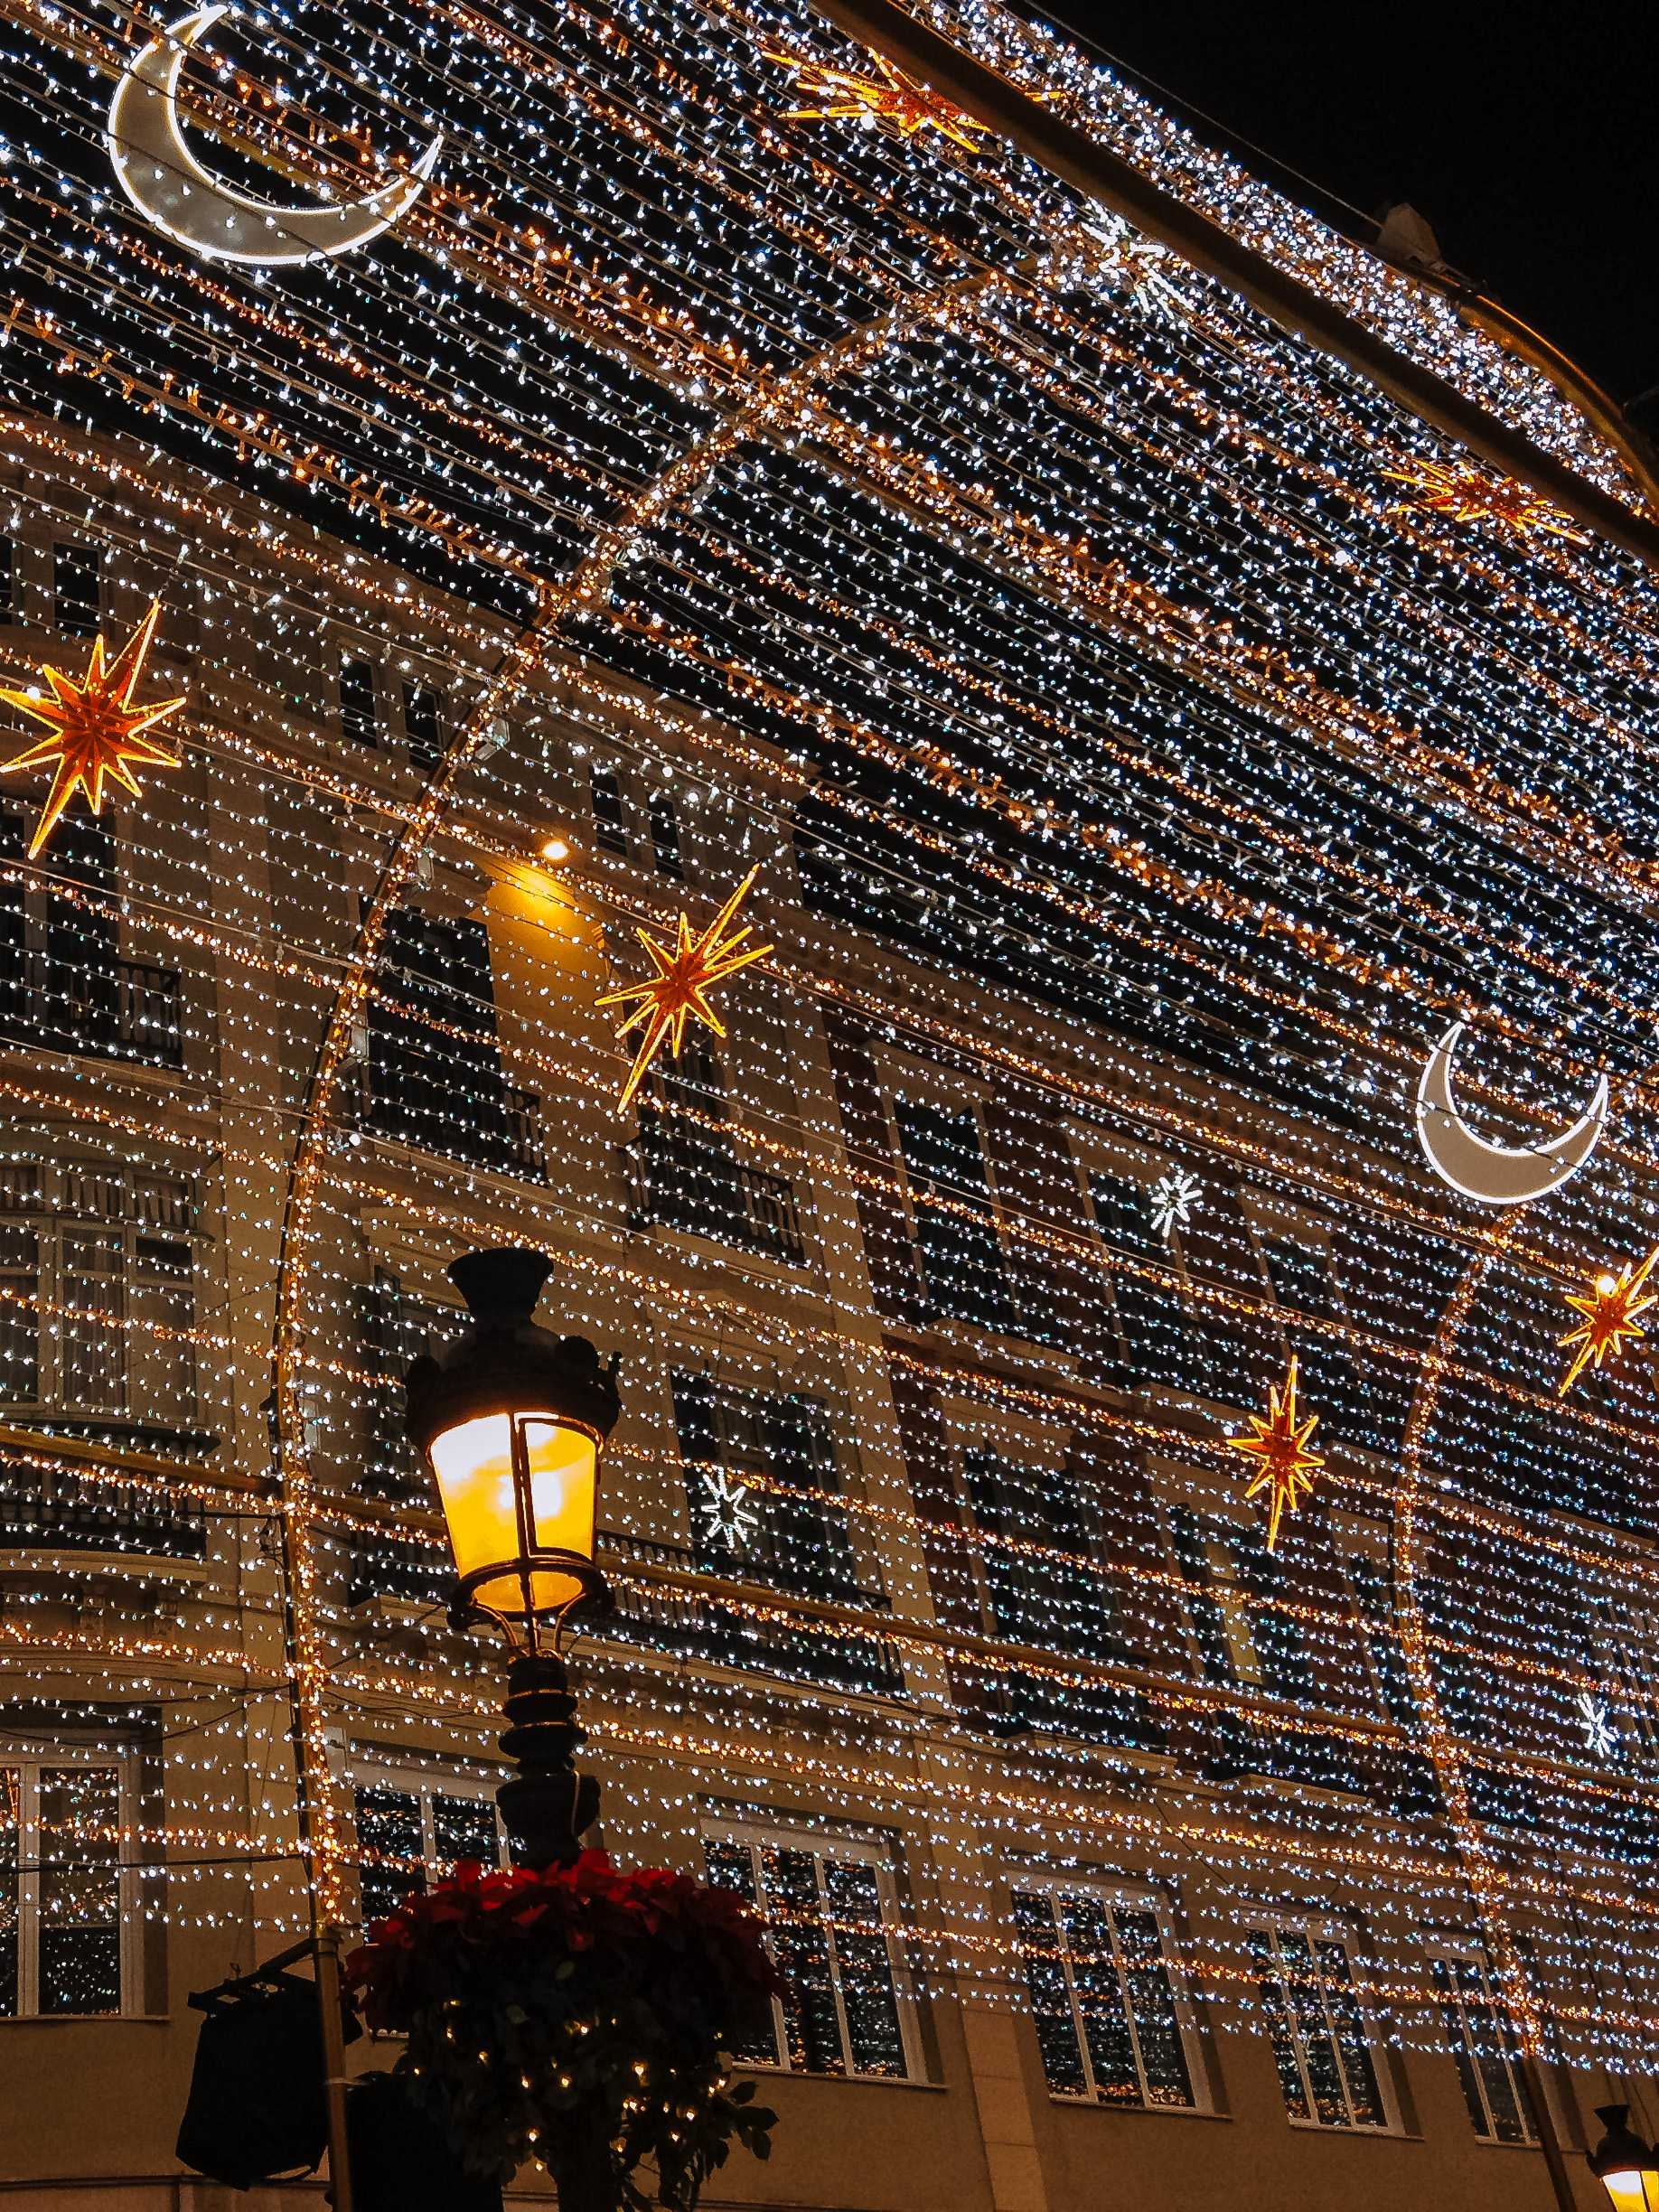 Best things to do in Malaga - Christmas lights at Calle Larios